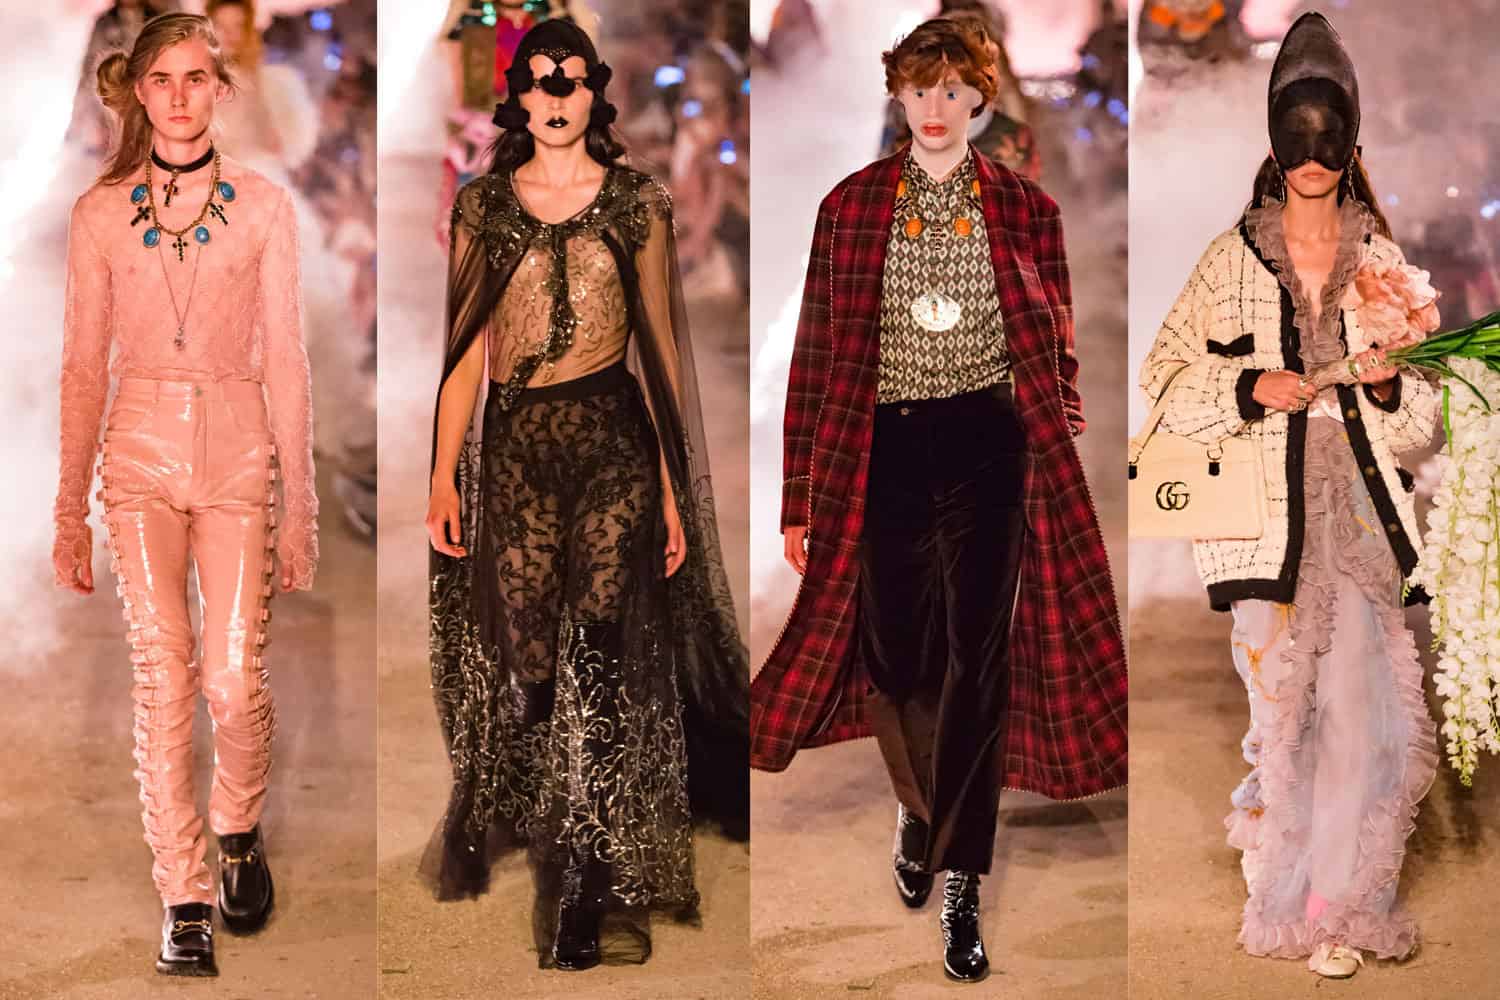 Gucci's 2019 Cruise Show Was Creepy AF 